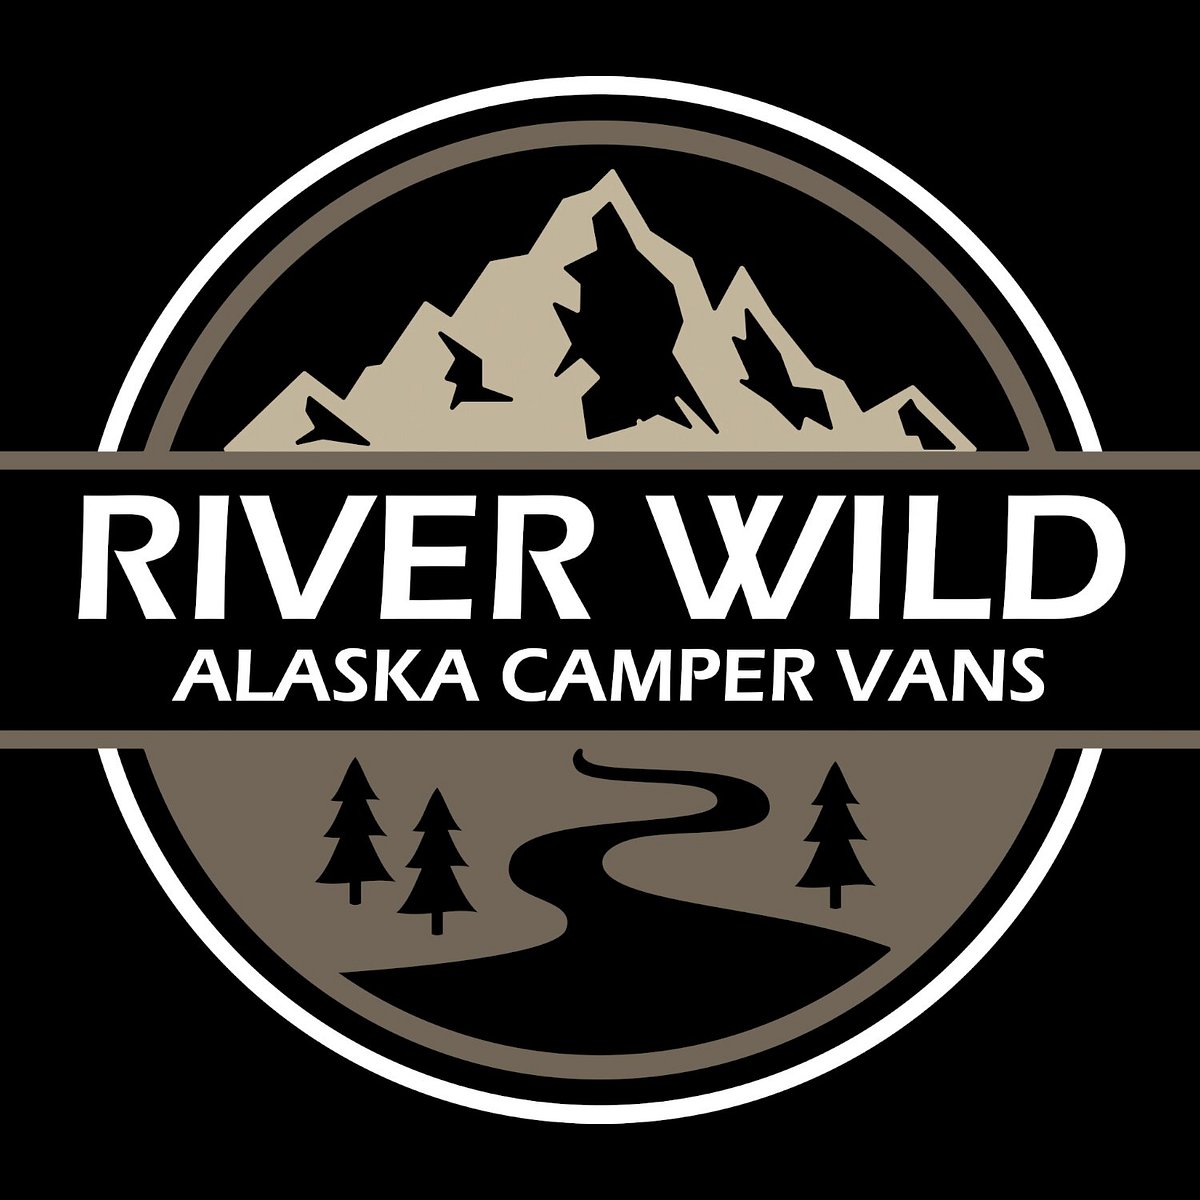 RIVER WILD CAMPER VANS (Anchorage) 2022 What to Know BEFORE You Go